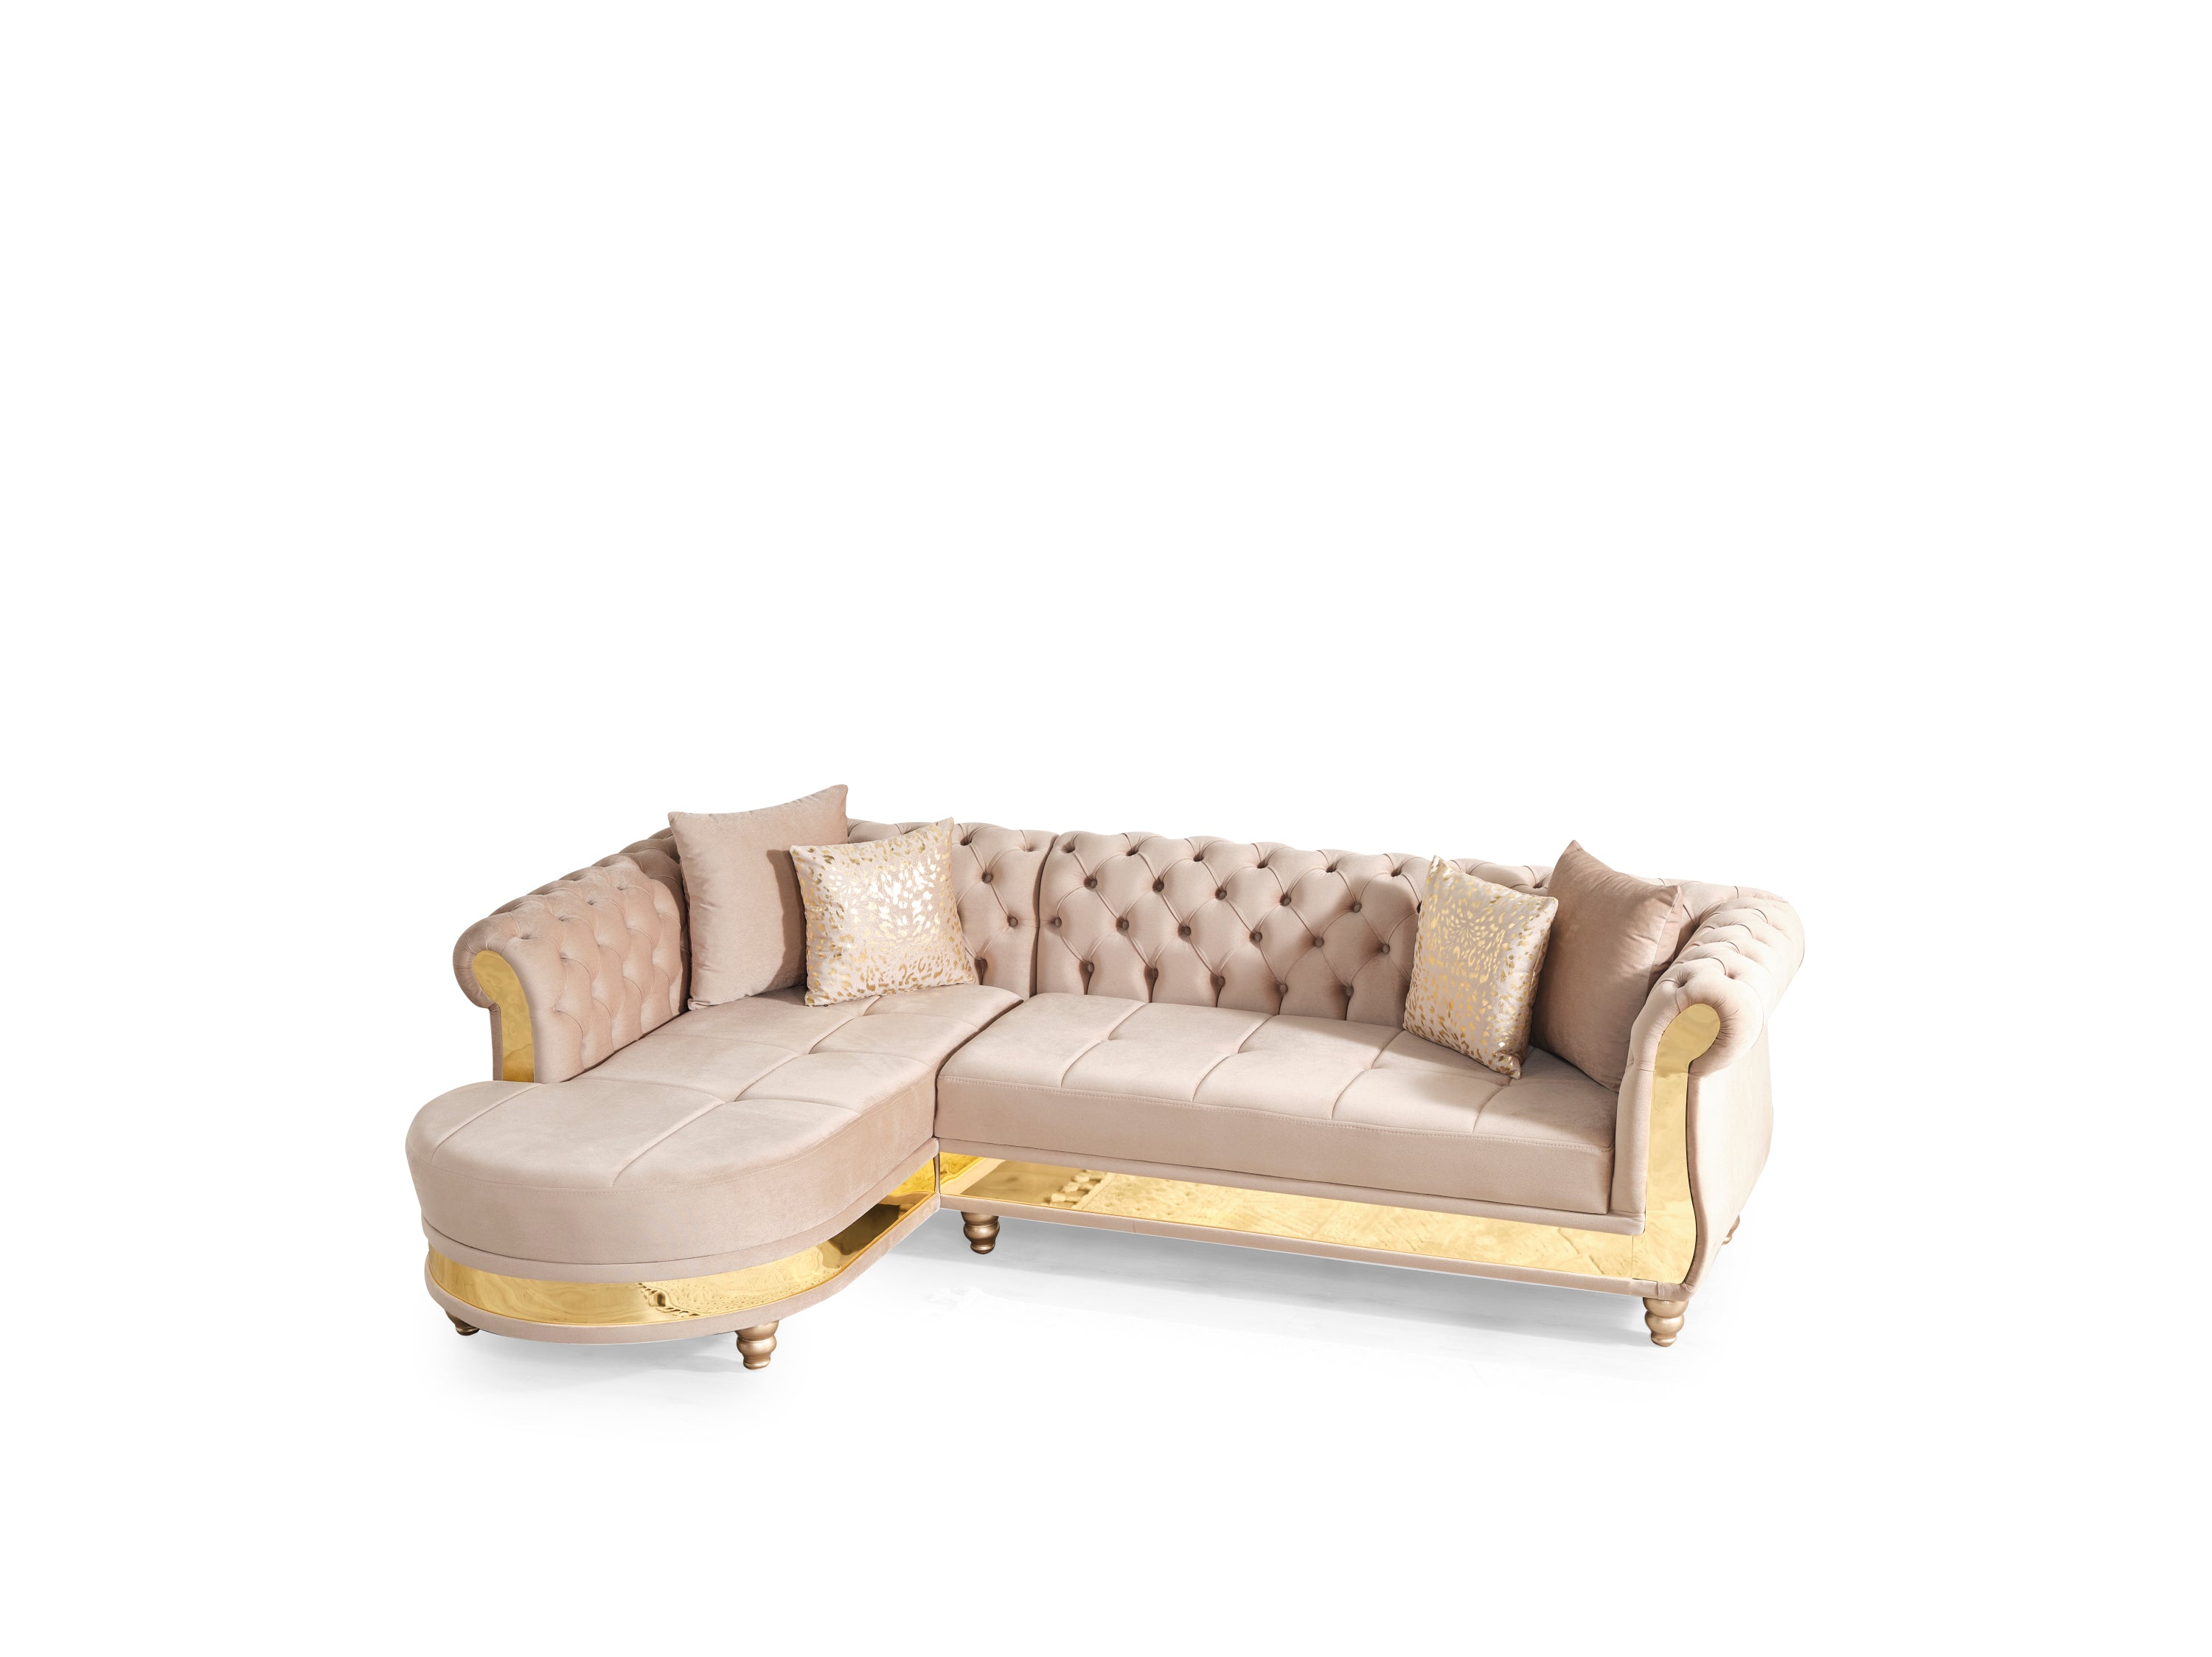 Gold Detailed Tufted Upholstery Sectional made with Wood In Taupe